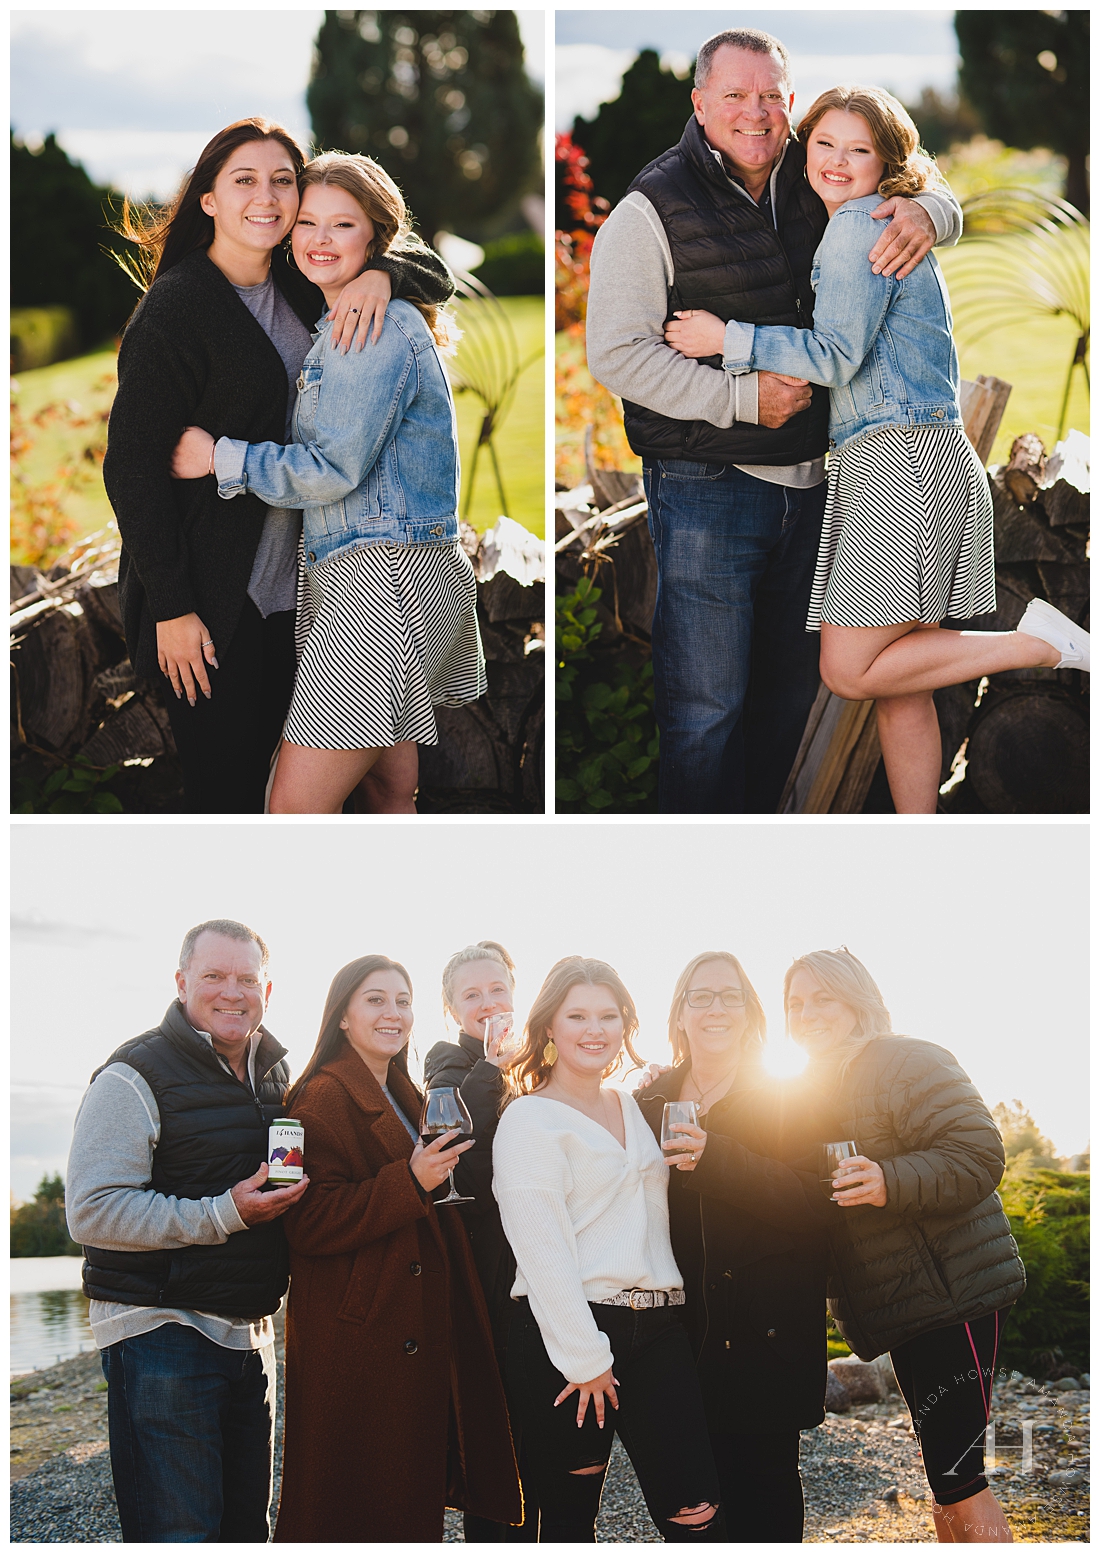 Bring your parents and siblings to your senior portraits for an extra confidence boost and plenty of memories | Photographed by Tacoma Senior Photographer Amanda Howse